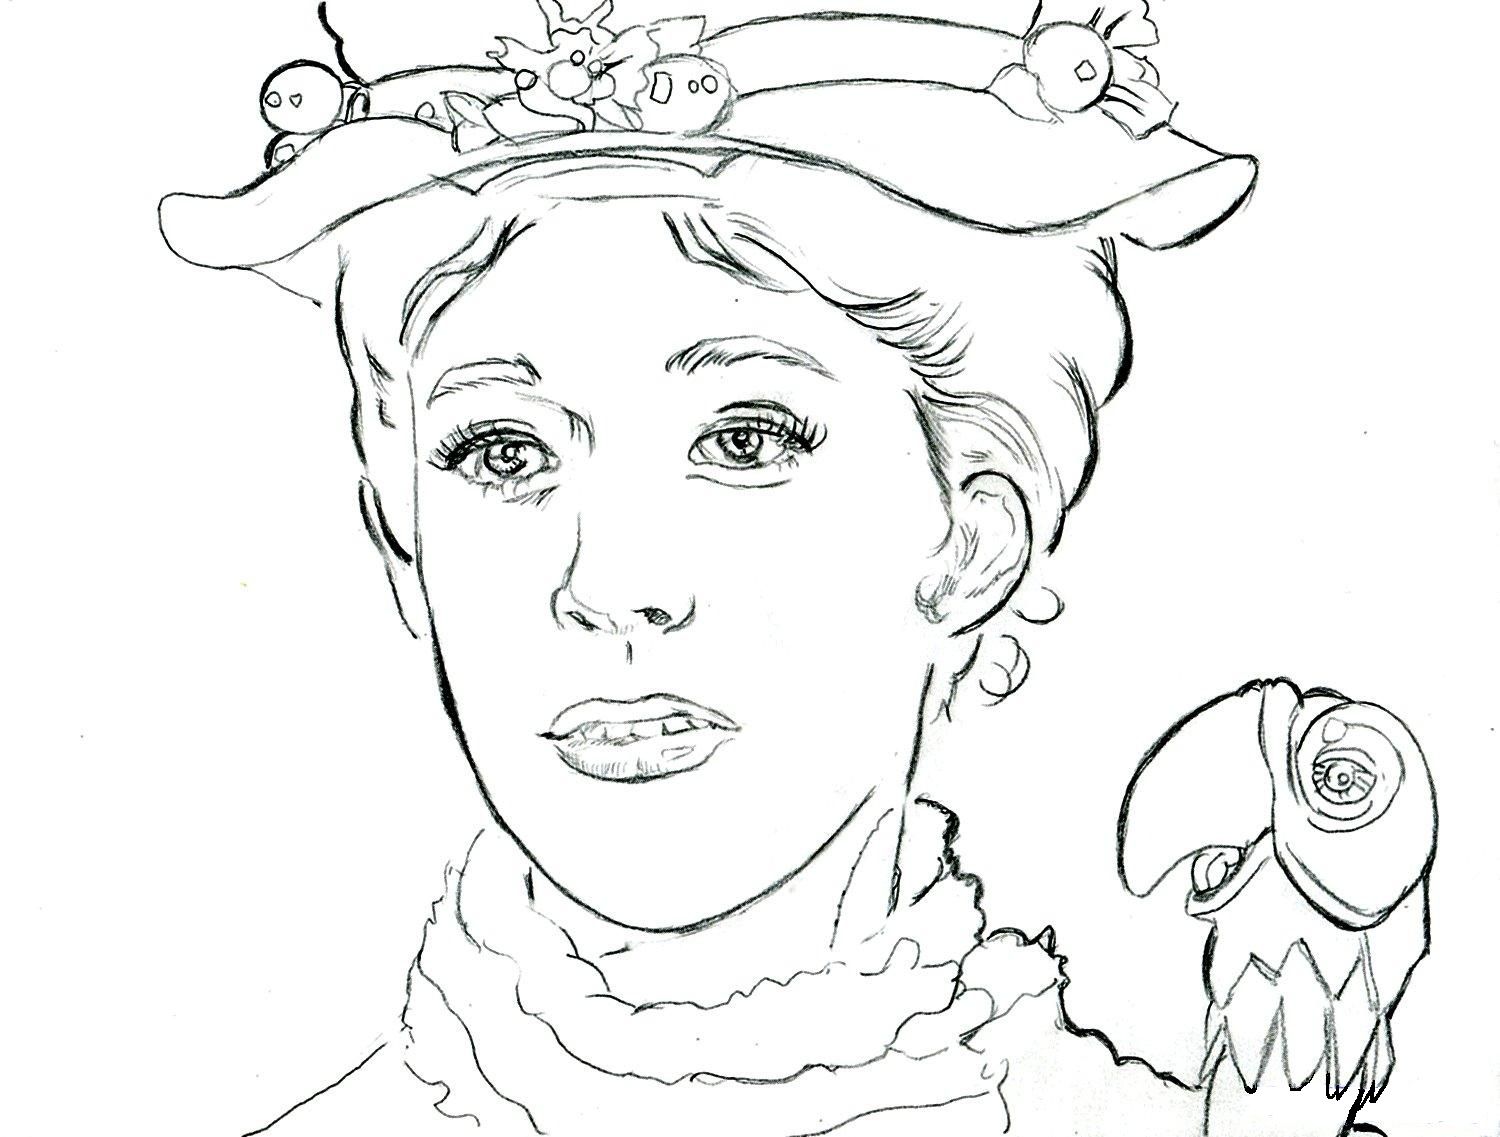 Mary poppins coloring pages to download and print for free